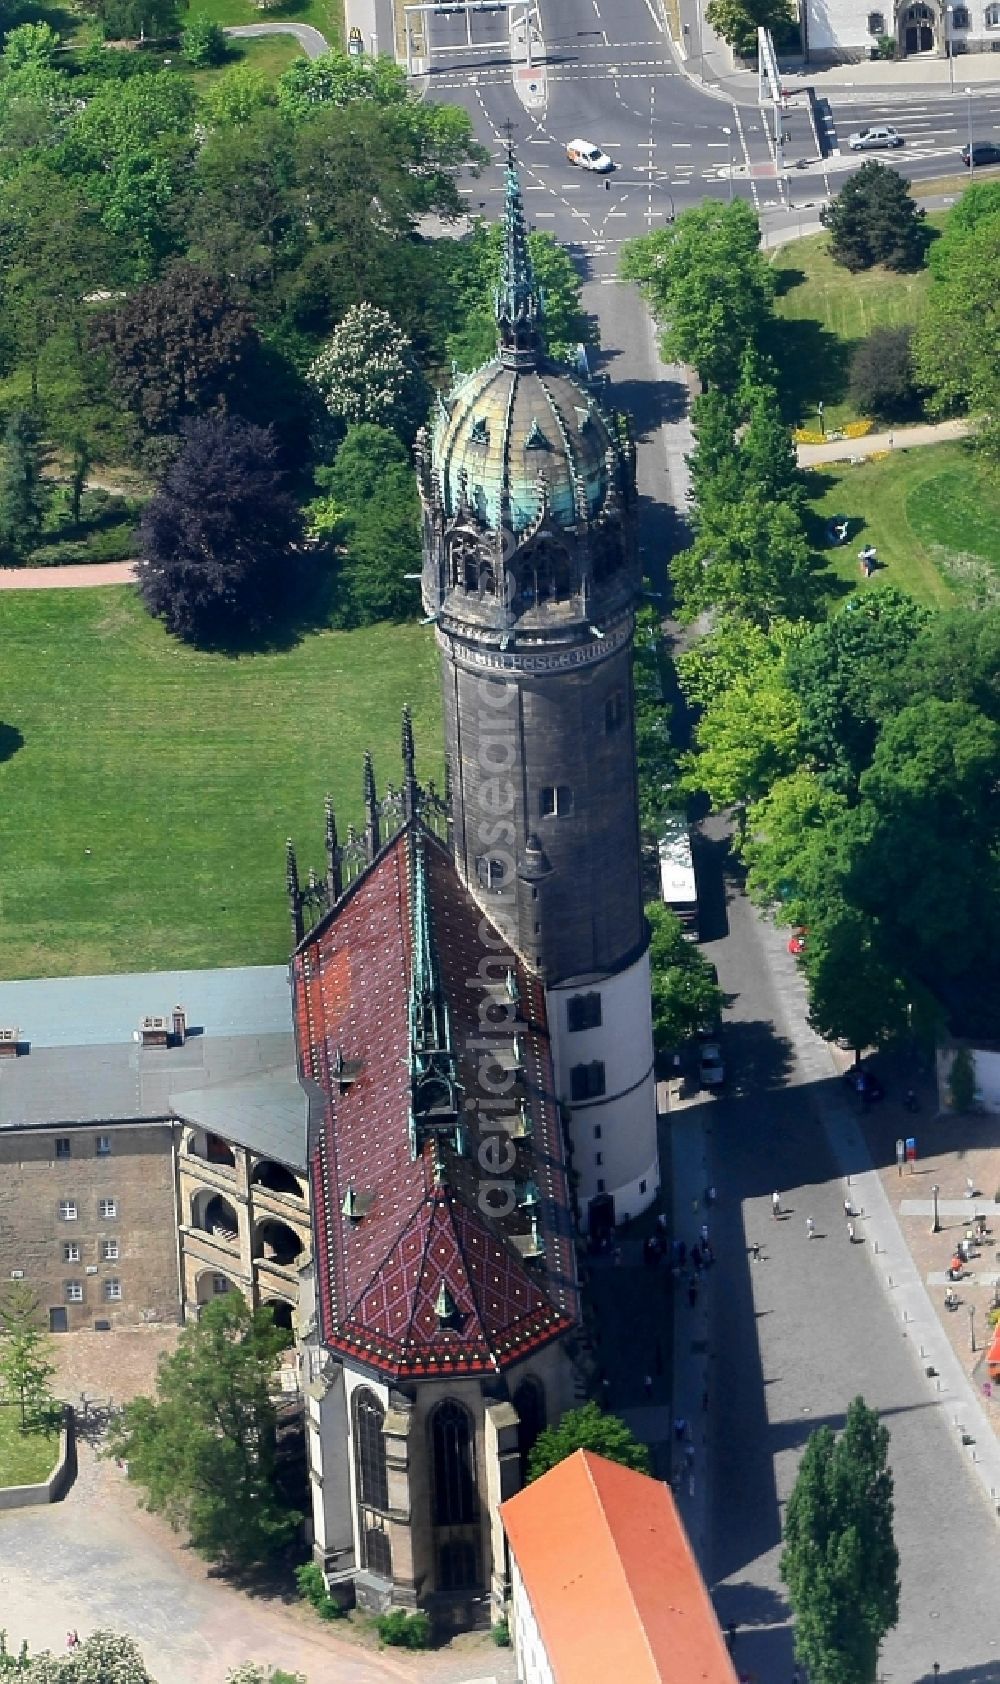 Lutherstadt Wittenberg from above - Castle church of Wittenberg with Gothic tower at the west end of the town is a UNESCO World Heritage Site